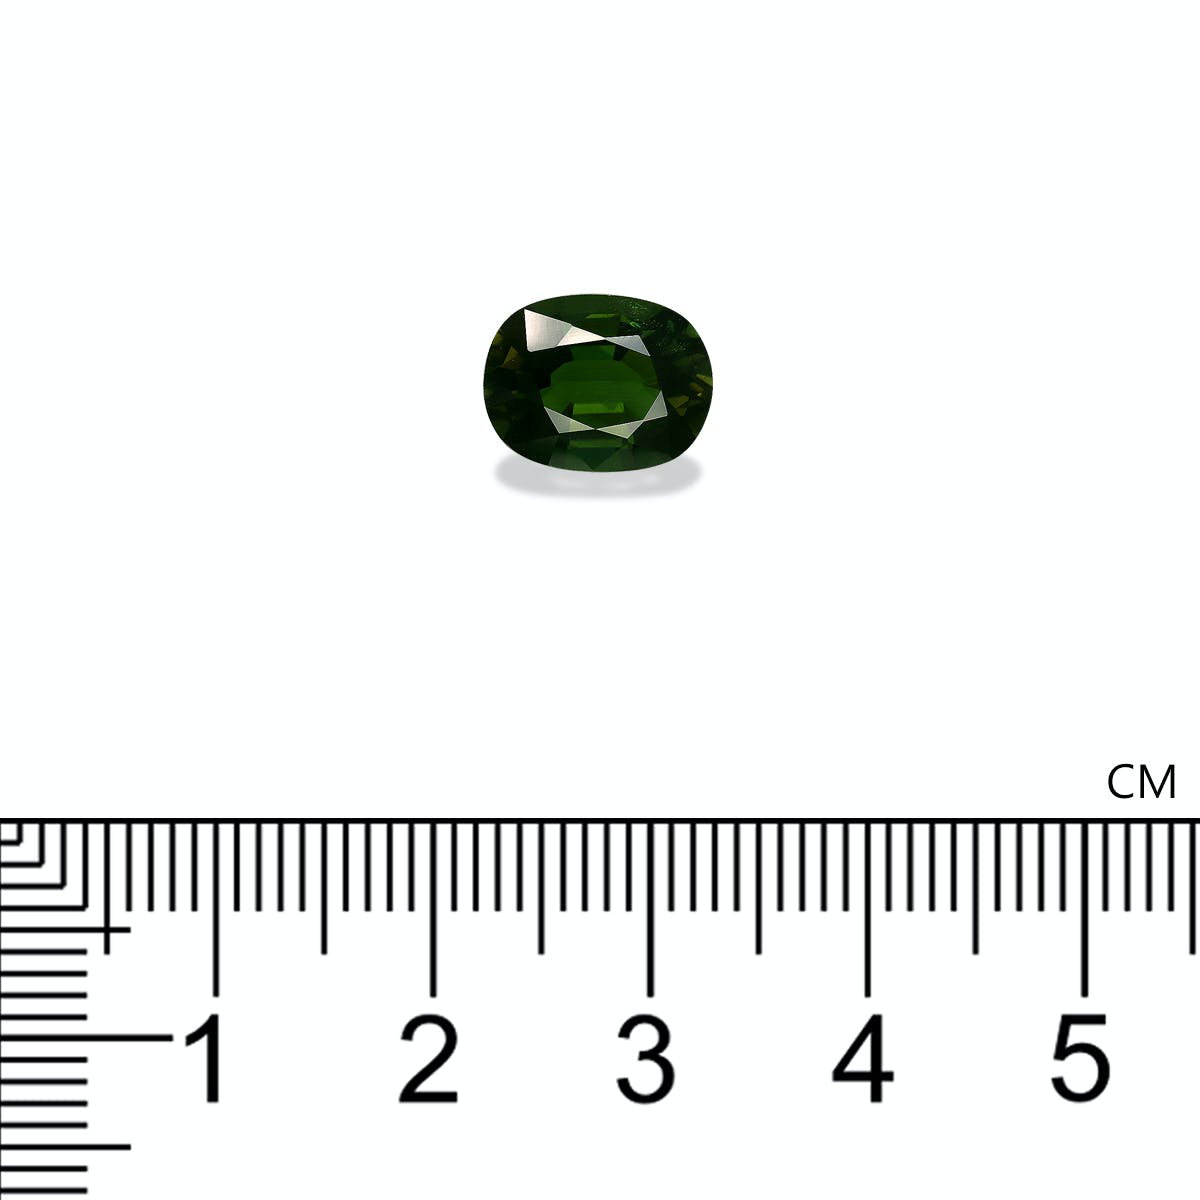 Picture of Basil Green Chrome Tourmaline 2.68ct - 10x8mm (CT0243)